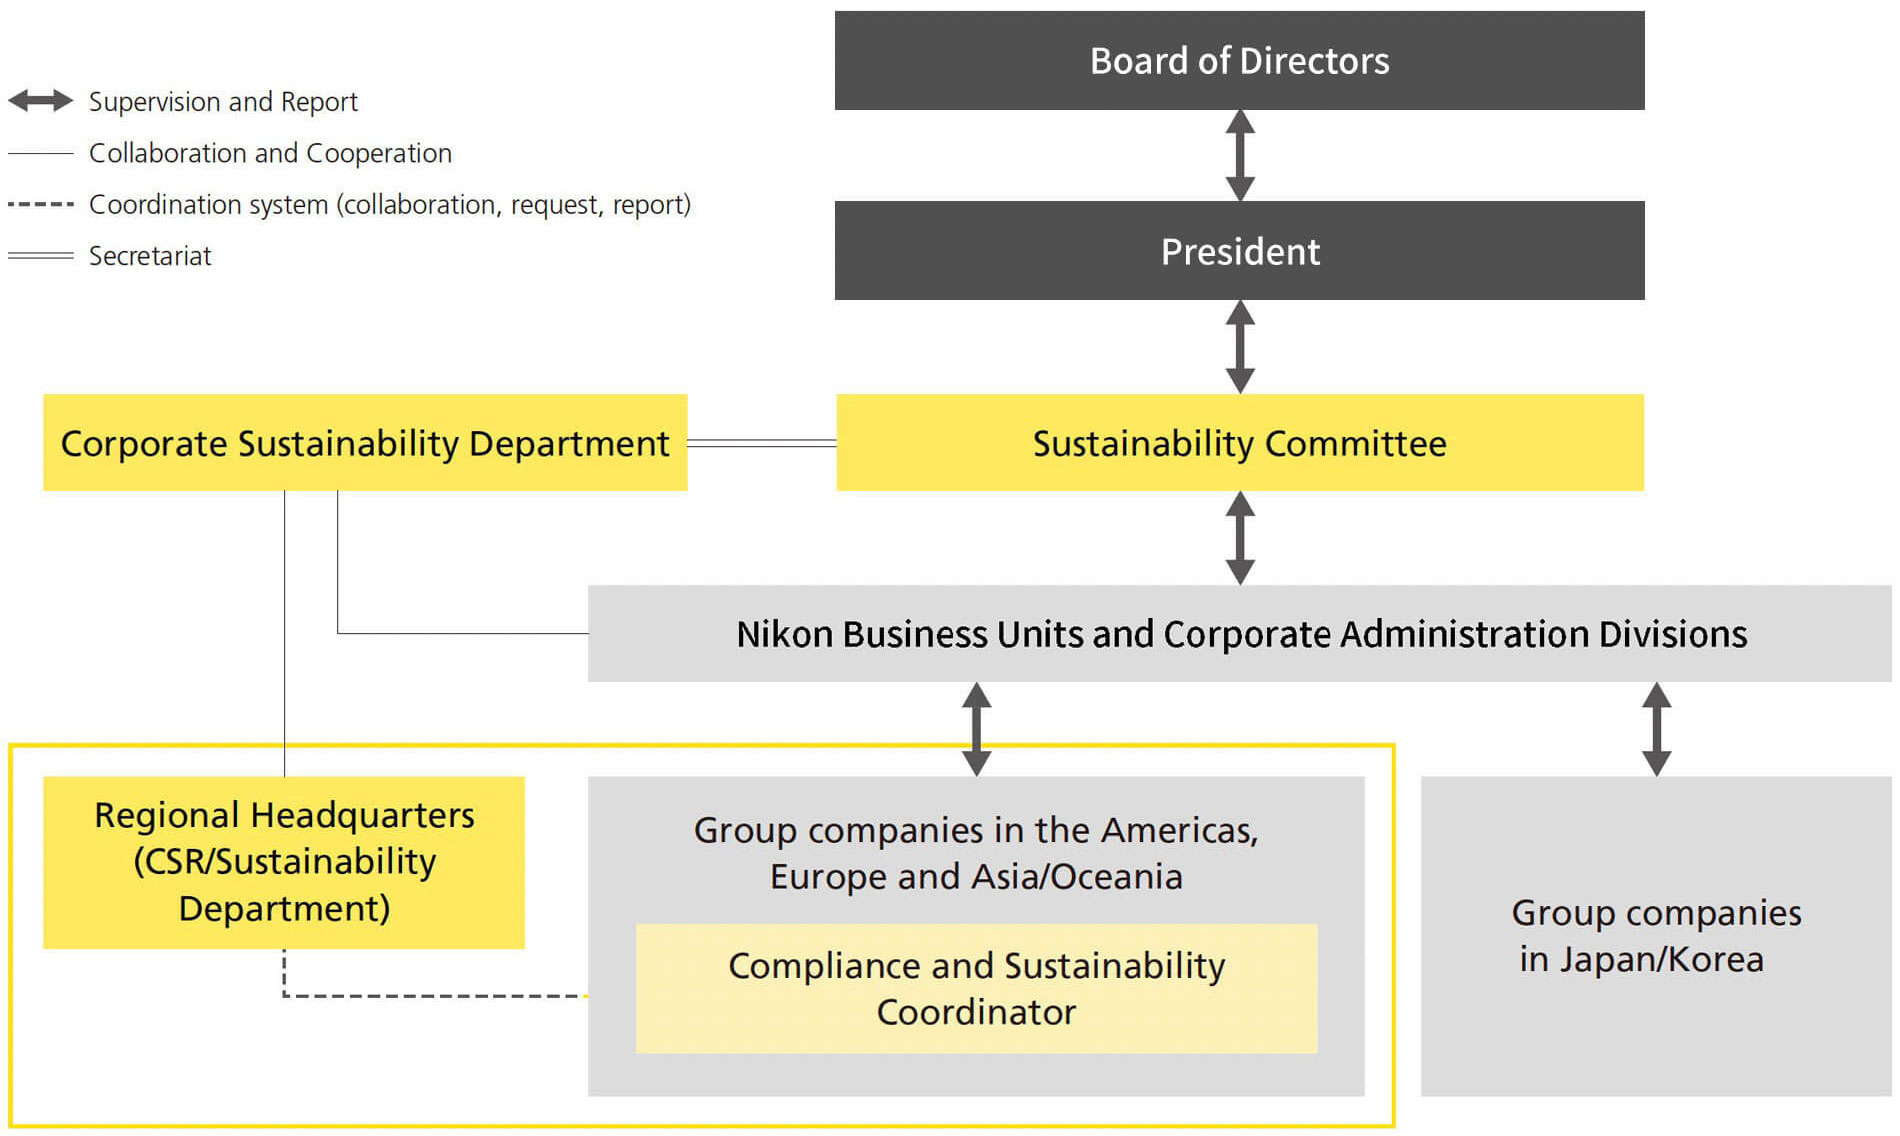 Board of Directors / President / Sustainability Committee / Nikon Business Units and Corporate Administration Divisions / Group companies in the Americas, Europe and Asia/Oceania(Compliance and Sustainability Coordinator) / Group companies in Japan and Korea supervise and report to each other. Corporate Sustainability Department and Sustainability Committee are related to the secretariat, and Corporate Sustainability Department, Nikon Business Units and Corporate Administration Divisions, and Regional Headquarters (CSR/Sustainability Department) are in collaboration and cooperation with each other. Regional Headquarters (CSR/Sustainability Department), Group companies in the Americas, Europe, and Asia/Oceania (Compliance and Sustainability Coordinator) are connected through a coordination system (collaboration, request, reports).